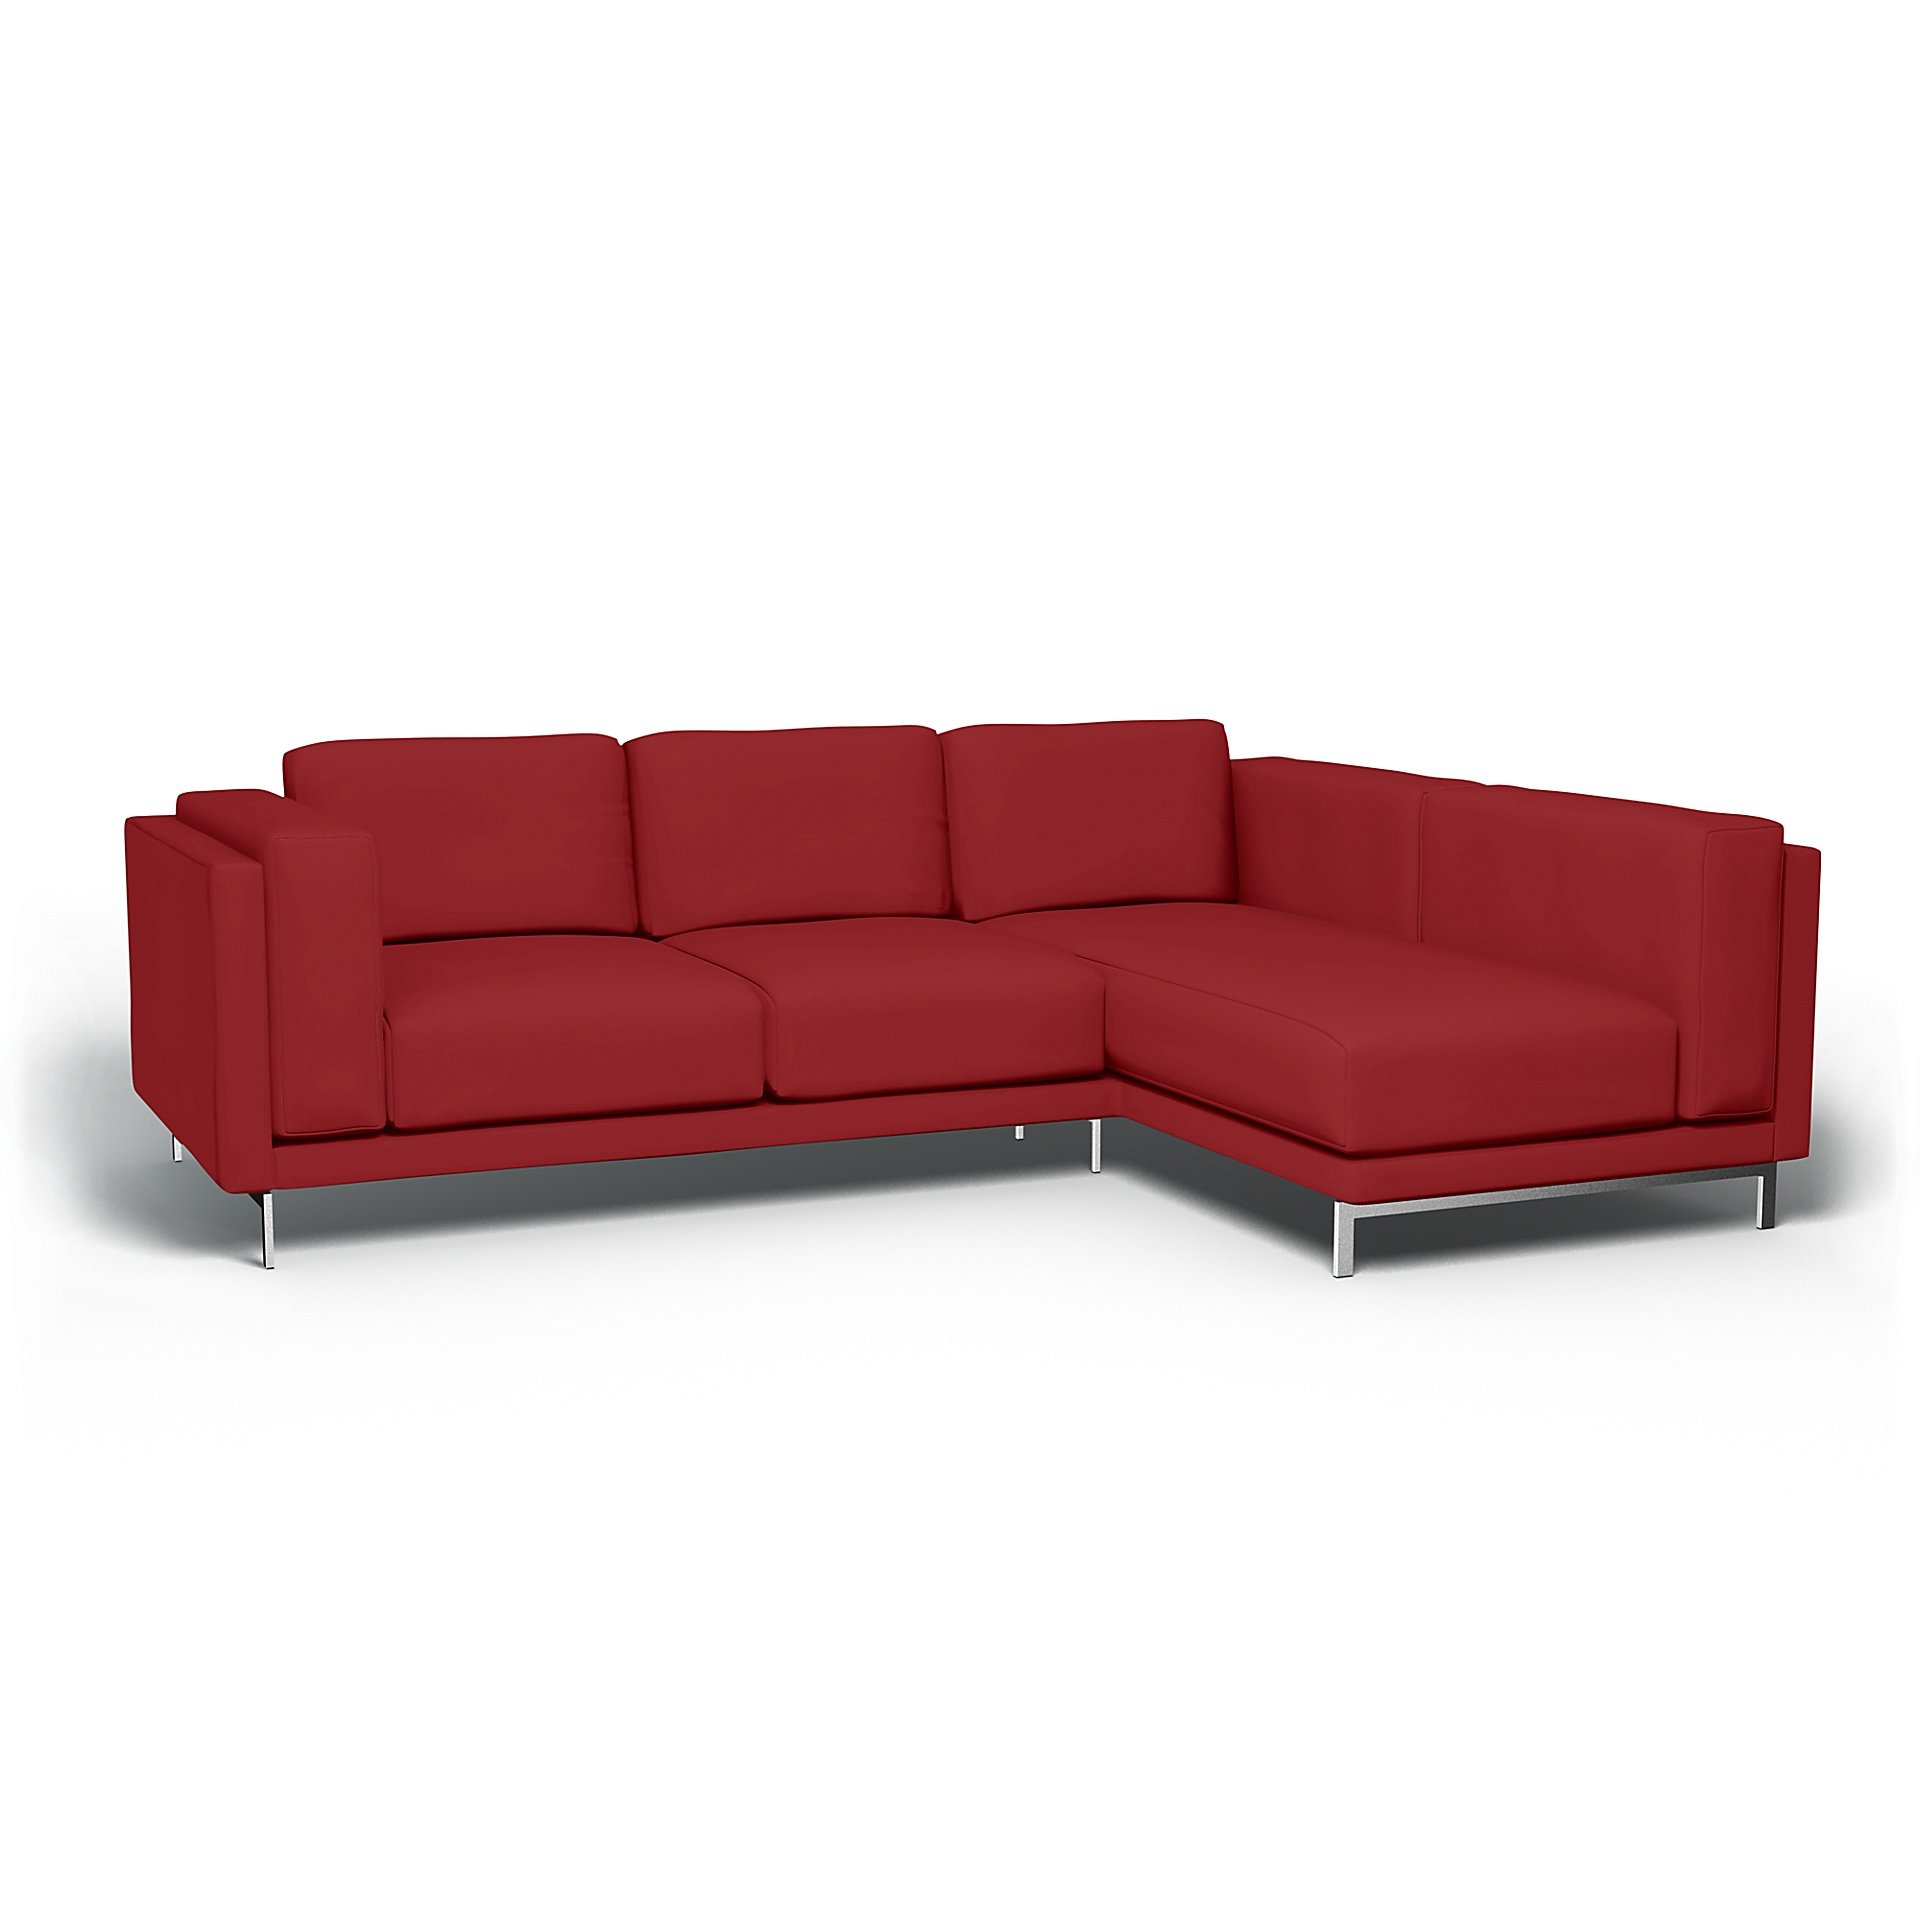 IKEA - Nockeby 3 Seat Sofa with Right Chaise Cover, Scarlet Red, Cotton - Bemz